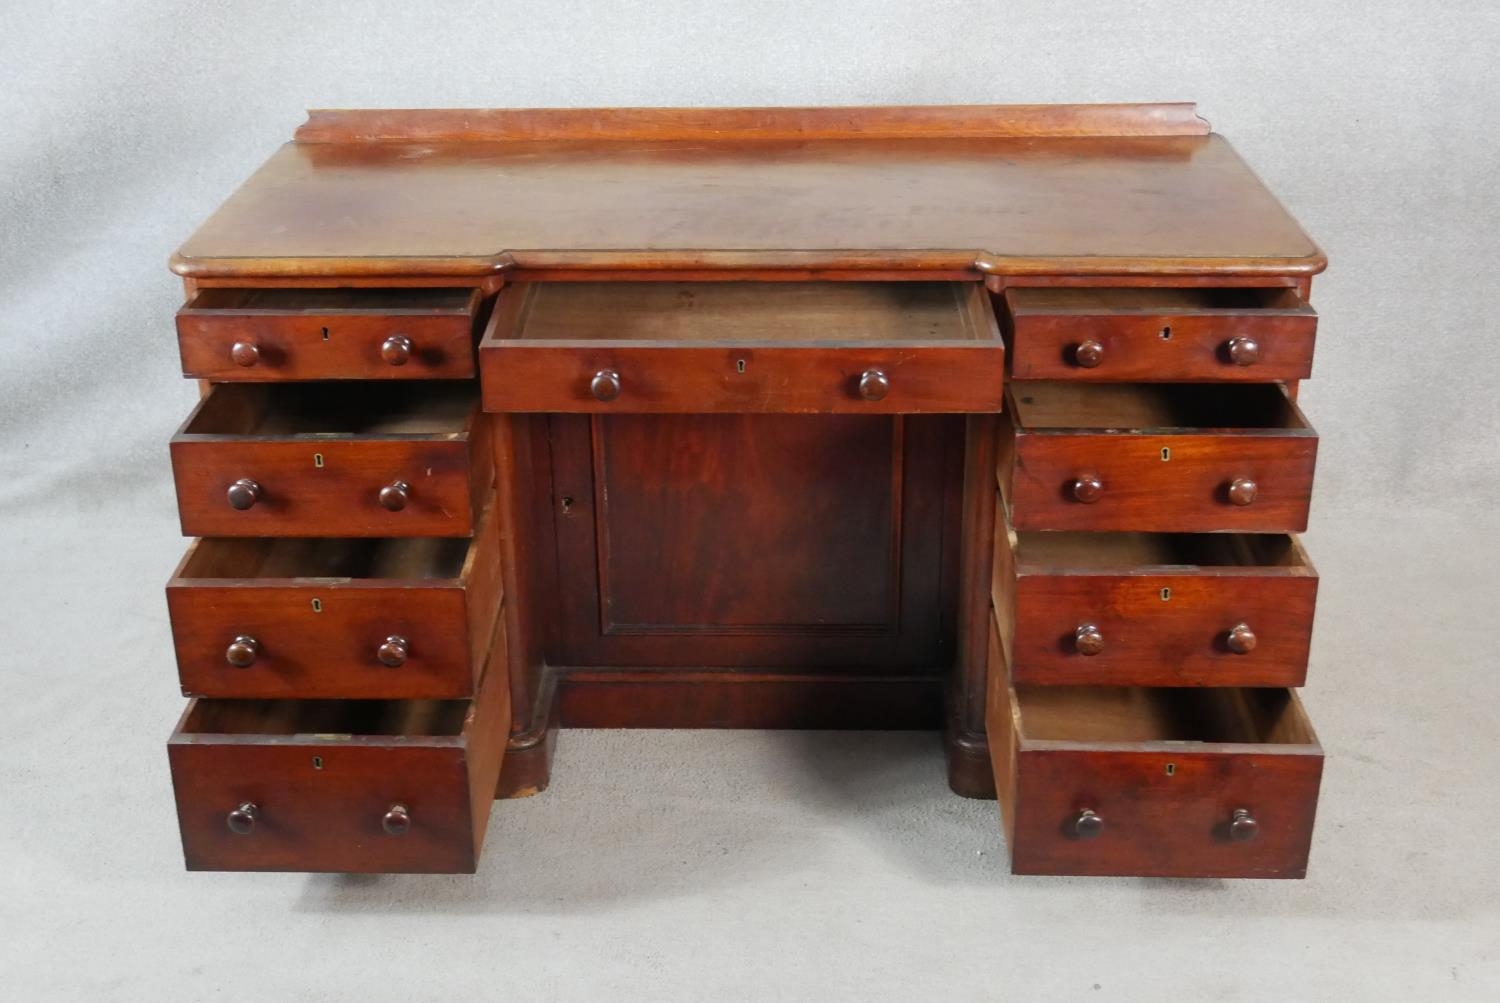 A 19th century mahogany pedestal desk with an arrangement of drawers and kneehole cupboard on plinth - Image 2 of 10